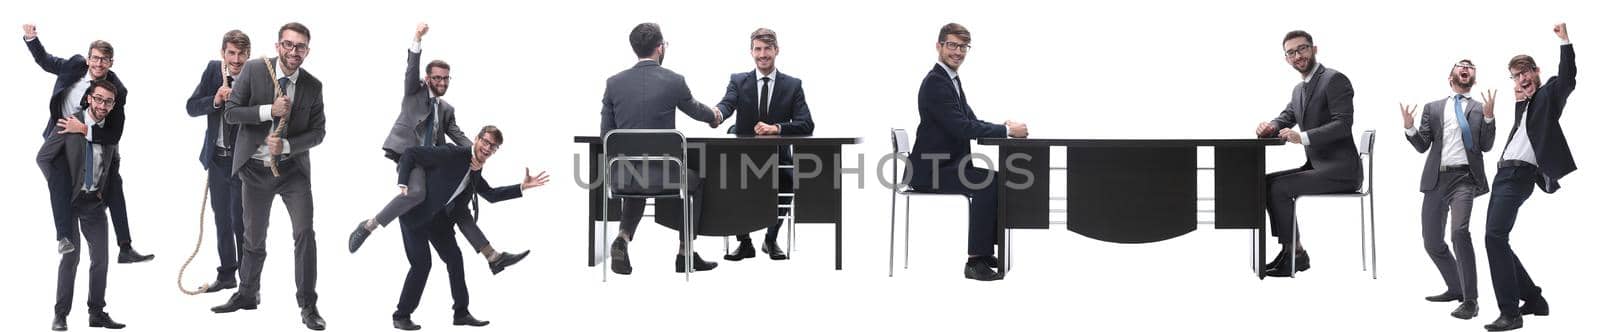 in full growth. two business people discussing something. isolated on white background